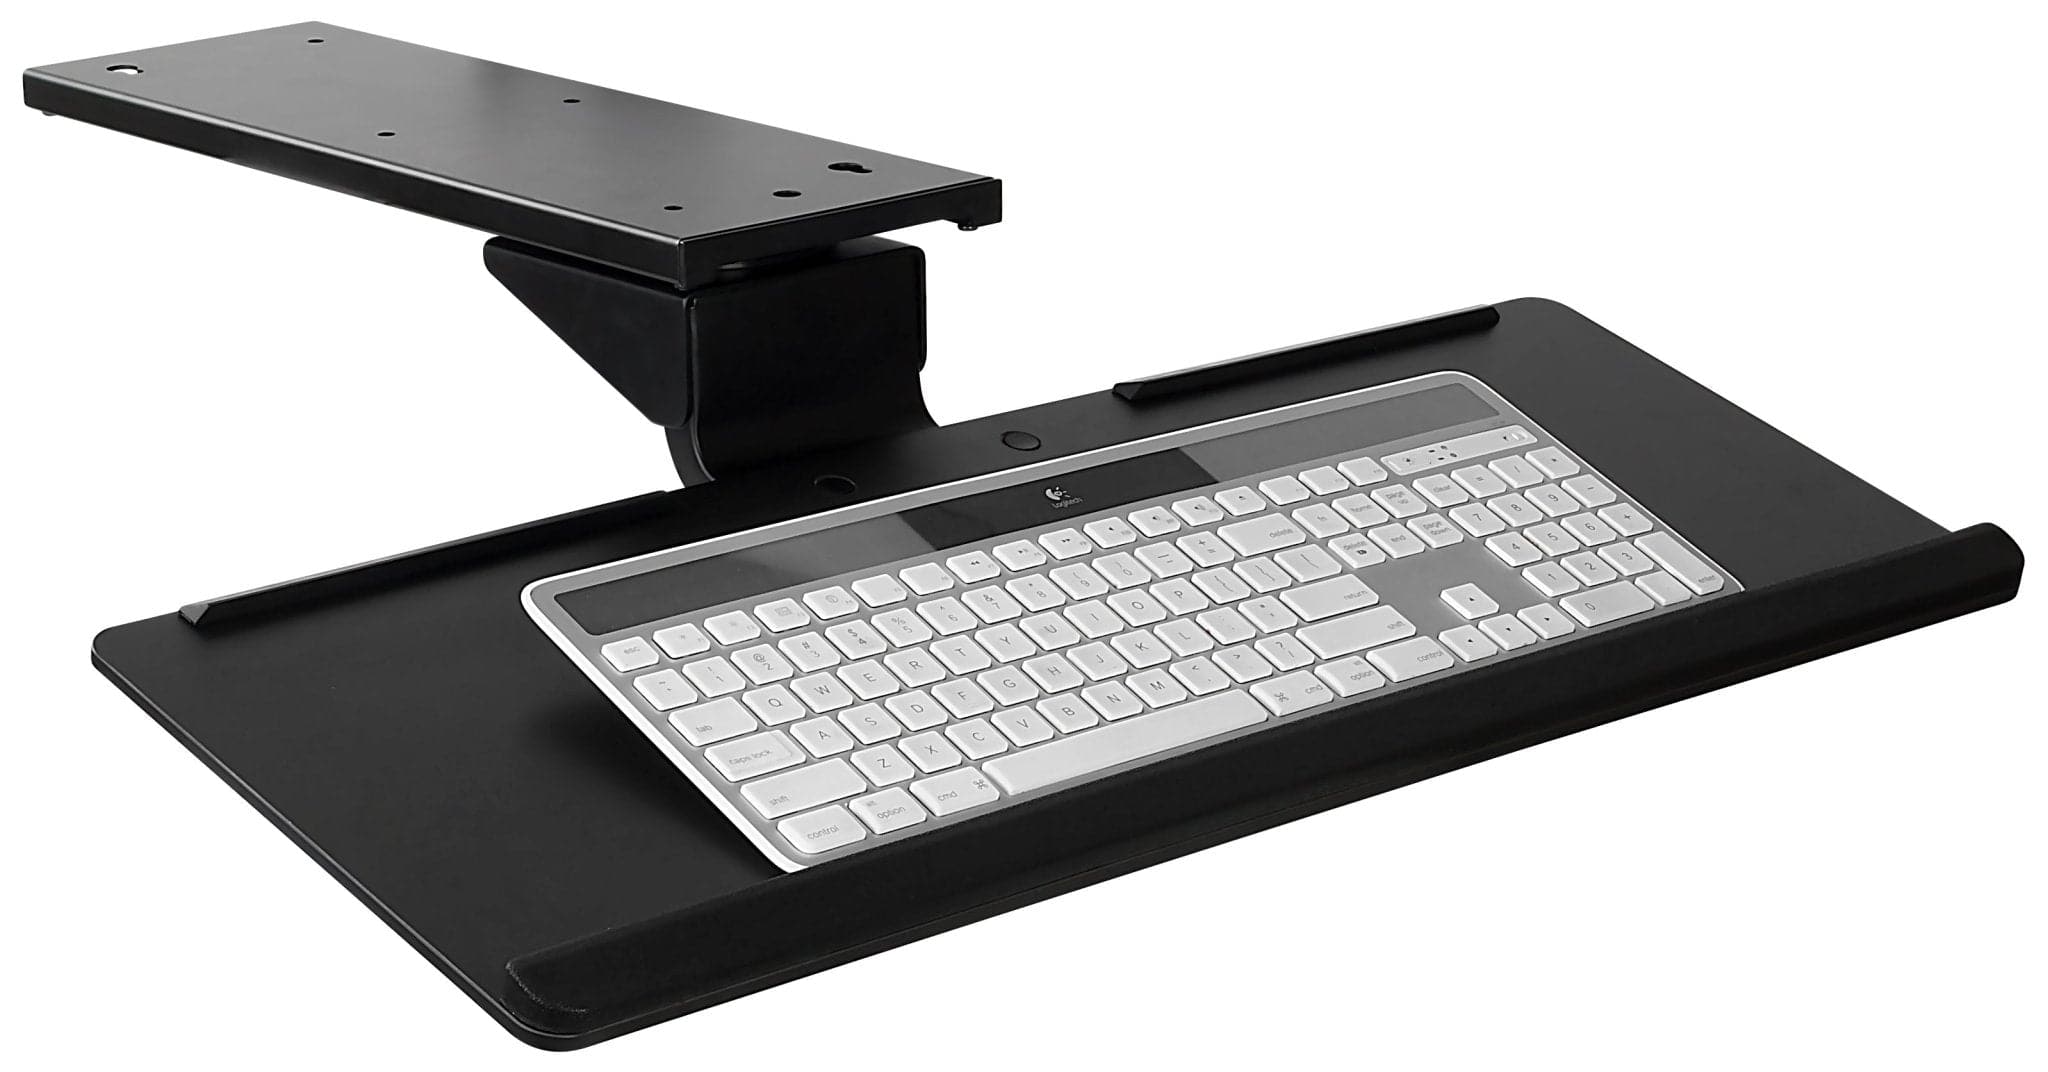 https://cdn.shopify.com/s/files/1/0051/3674/4566/products/adjustable-keyboard-tray-and-mouse-platform-w-wrist-rest-pad-319530.jpg?v=1687277839